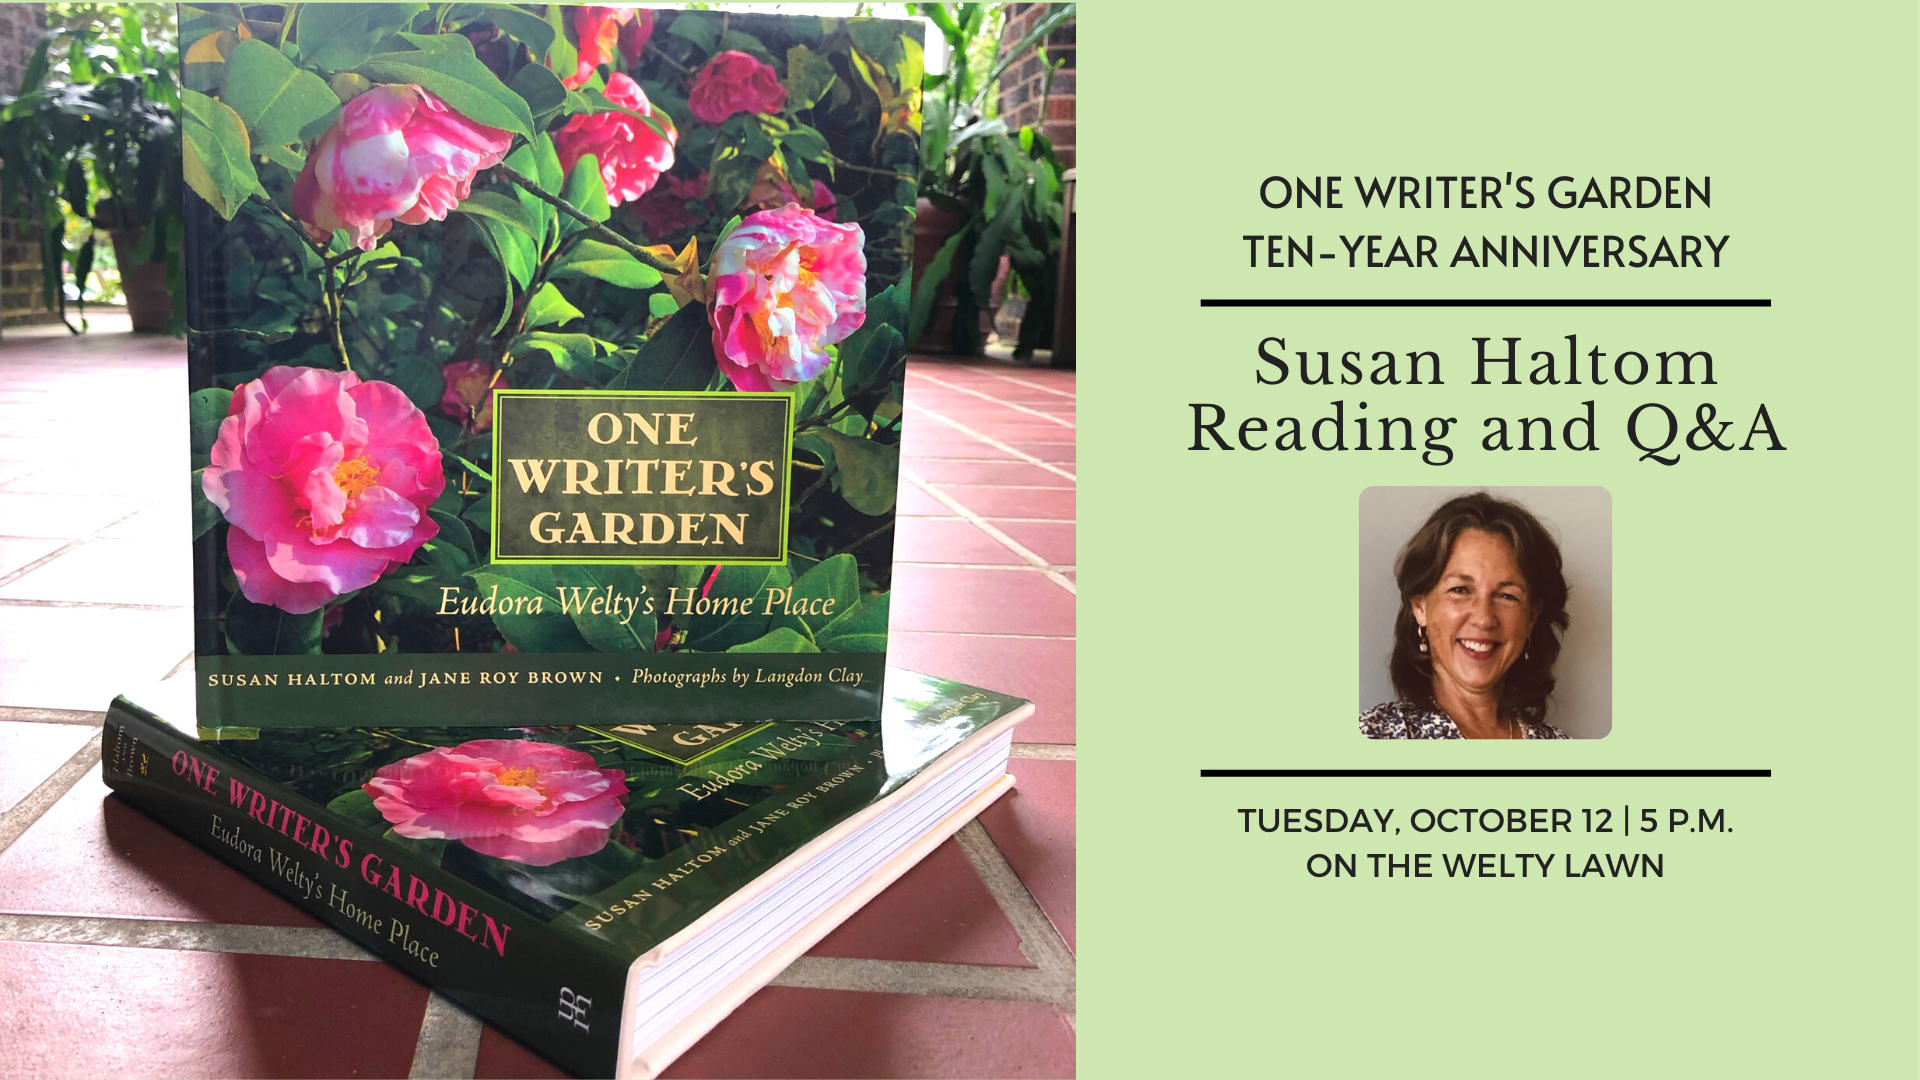 Cover of One Writer's Garden: Eudora Welty's Home Place on the side porch of the Welty house, beside a green graphic with an inset photo of author Susan Haltom surrounded by black text inviting guests to a reading